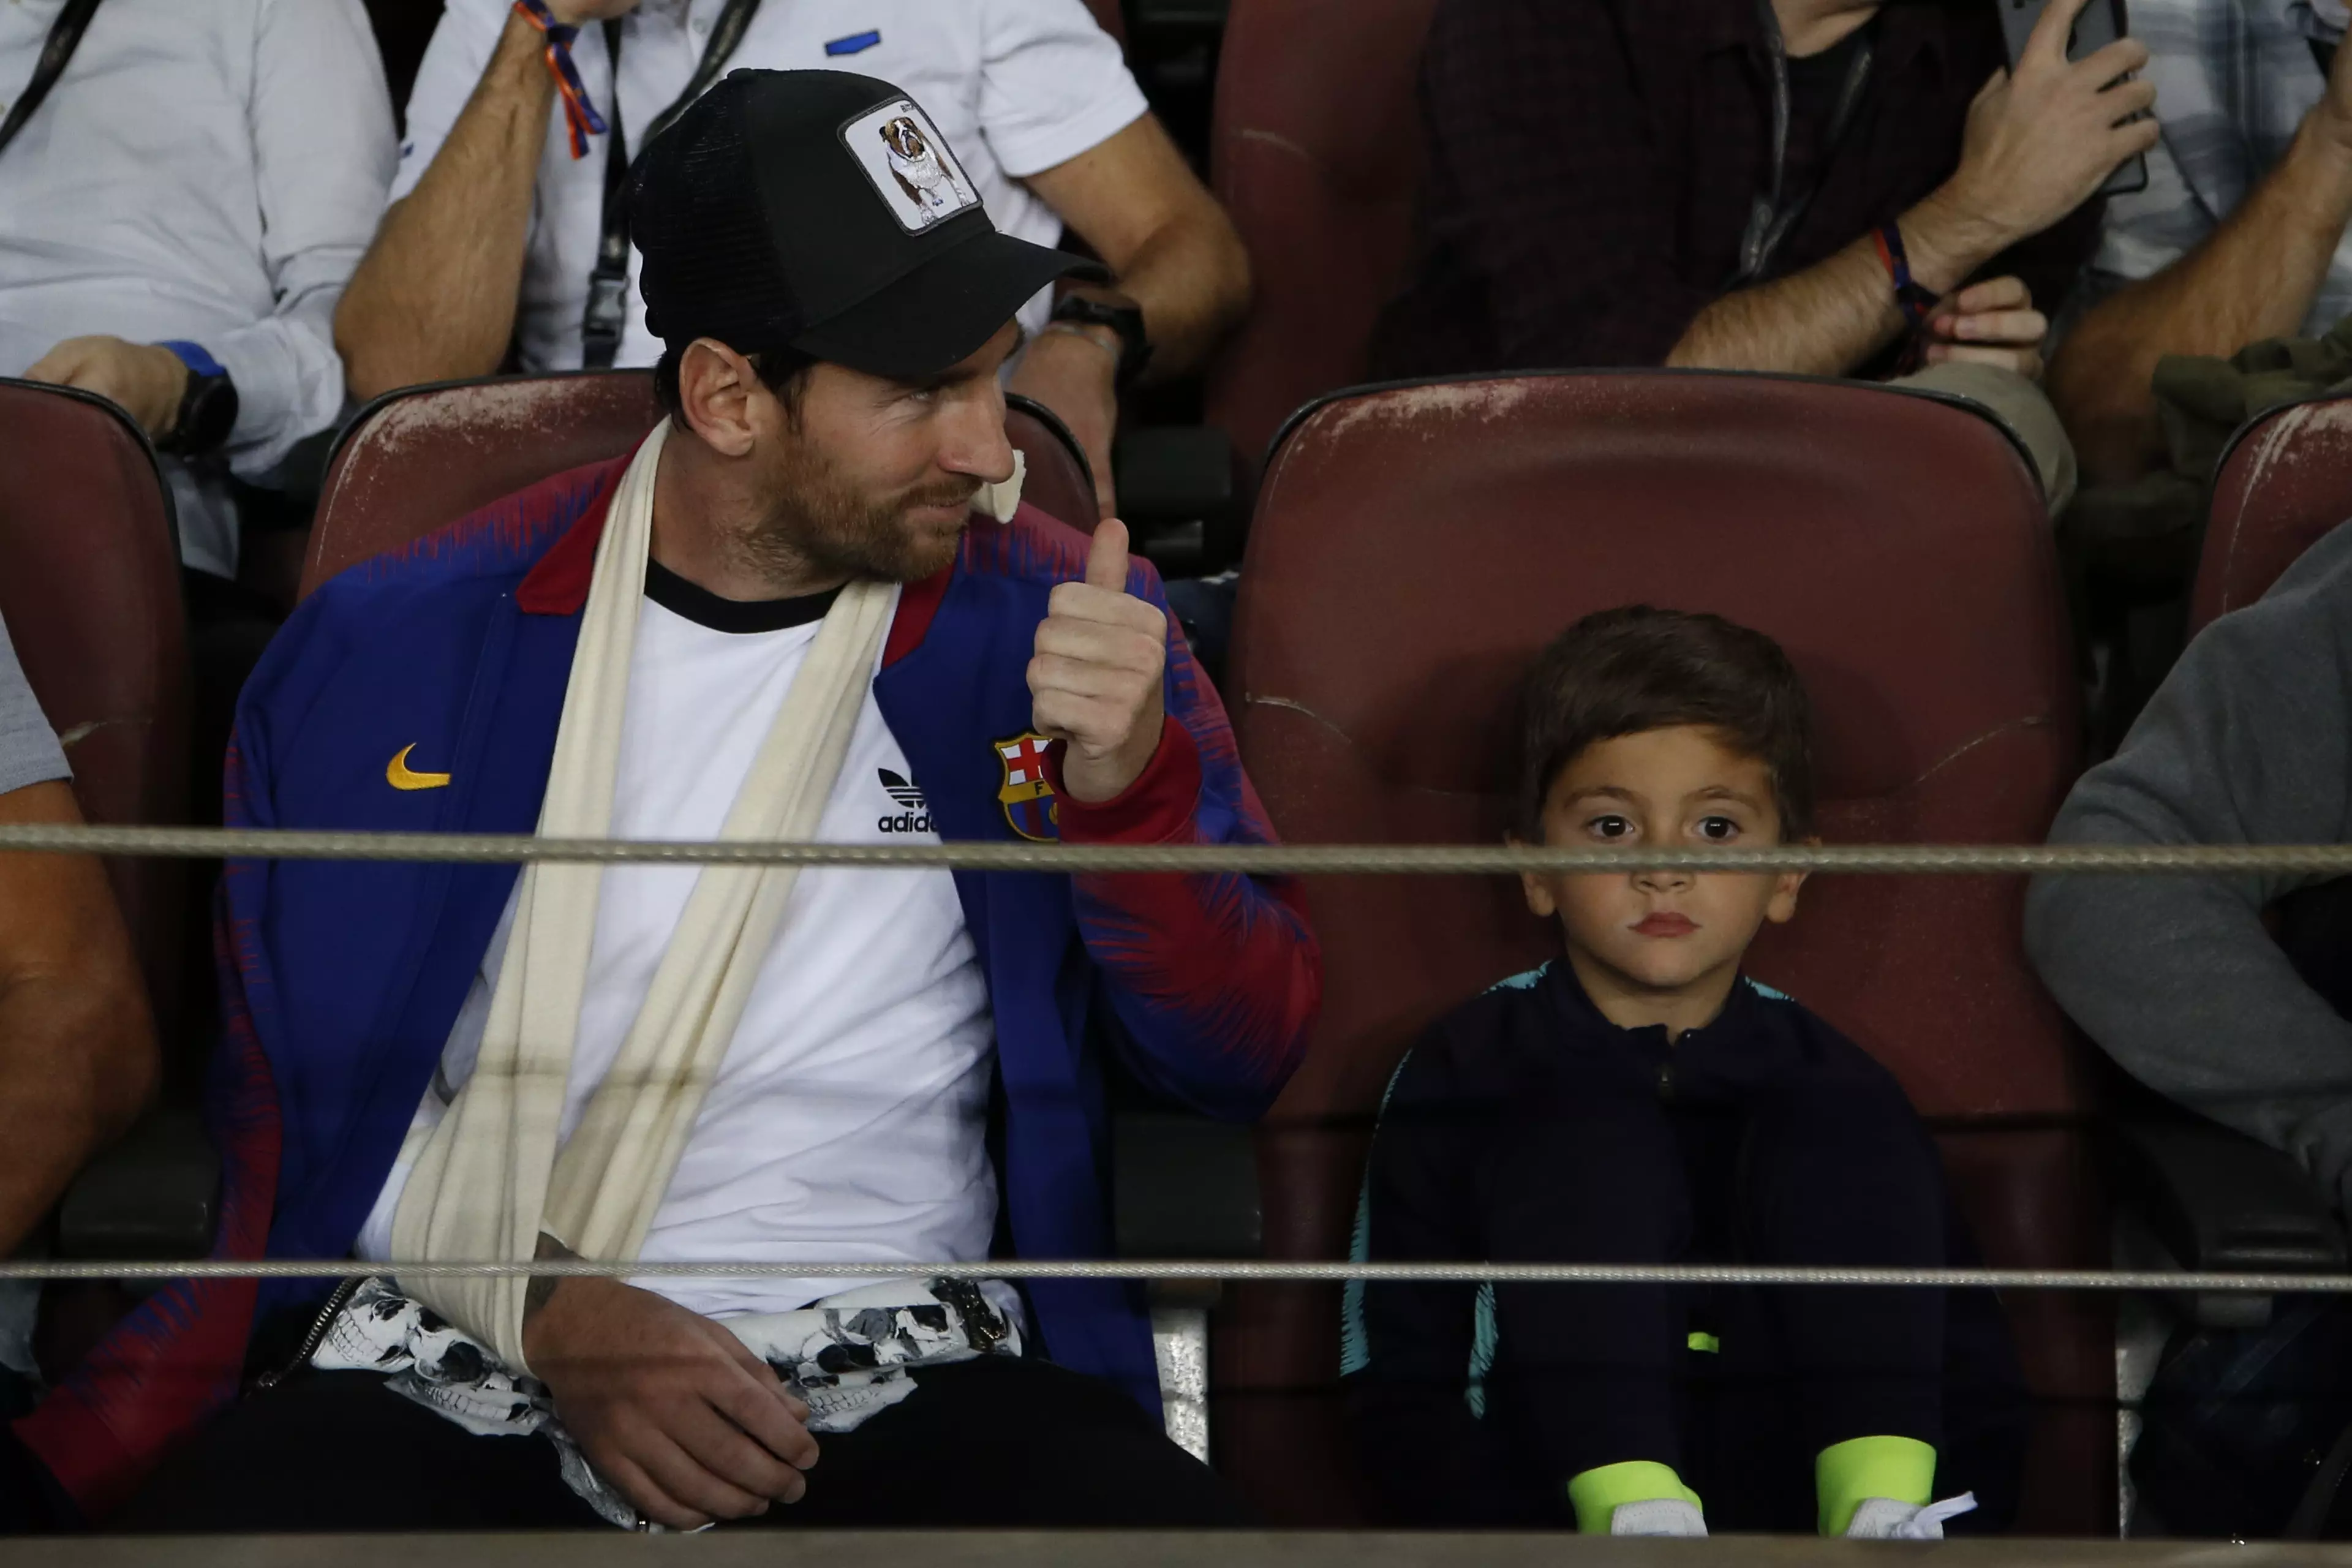 Messi is clearly enjoying watching for once. Image: PA Images